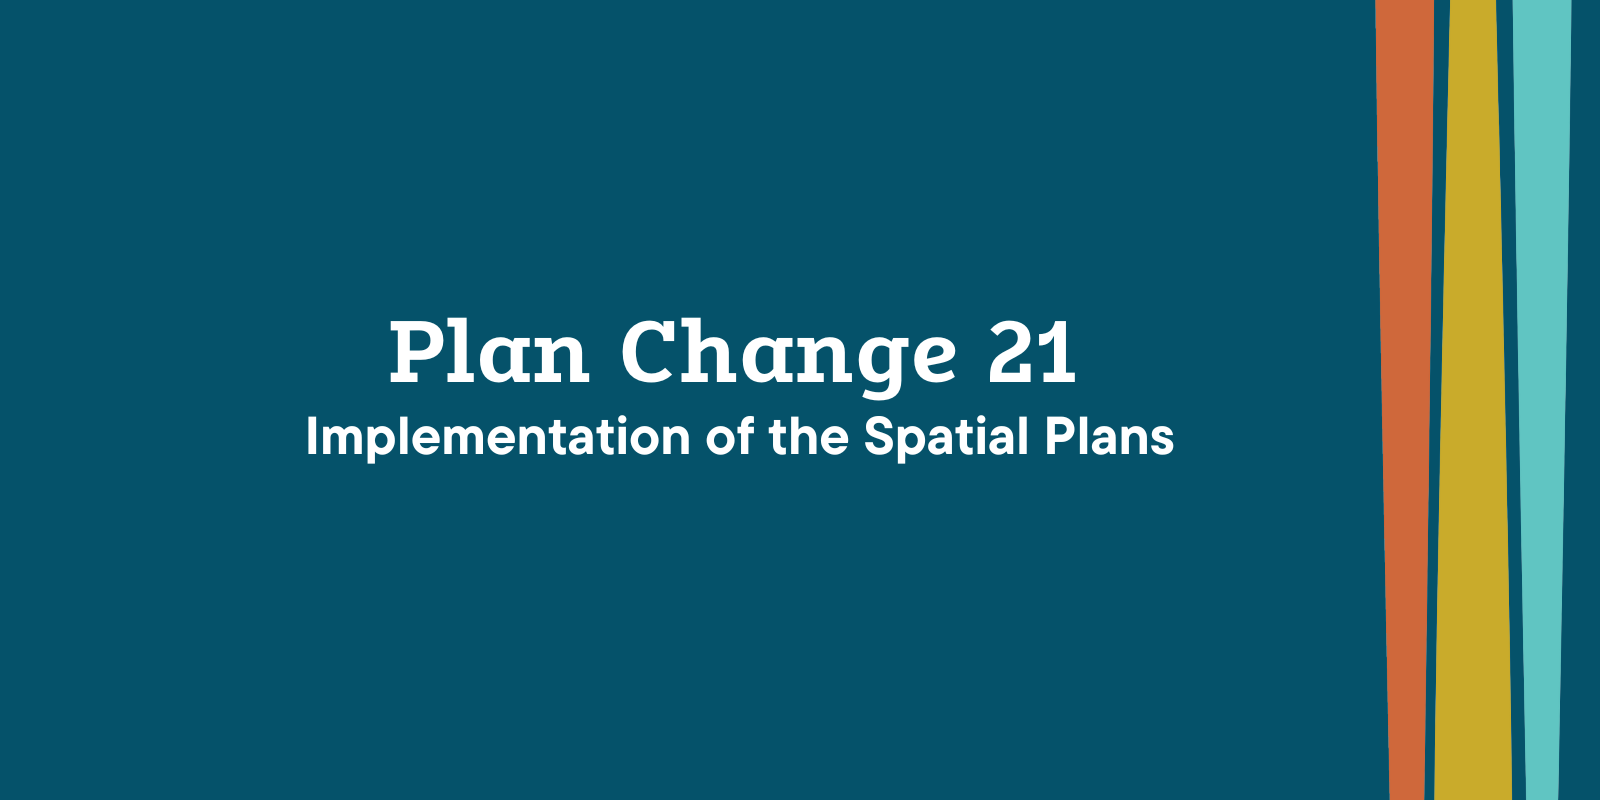 District Plan Banner - PC21 Implementation of the Spatial Plans banner image